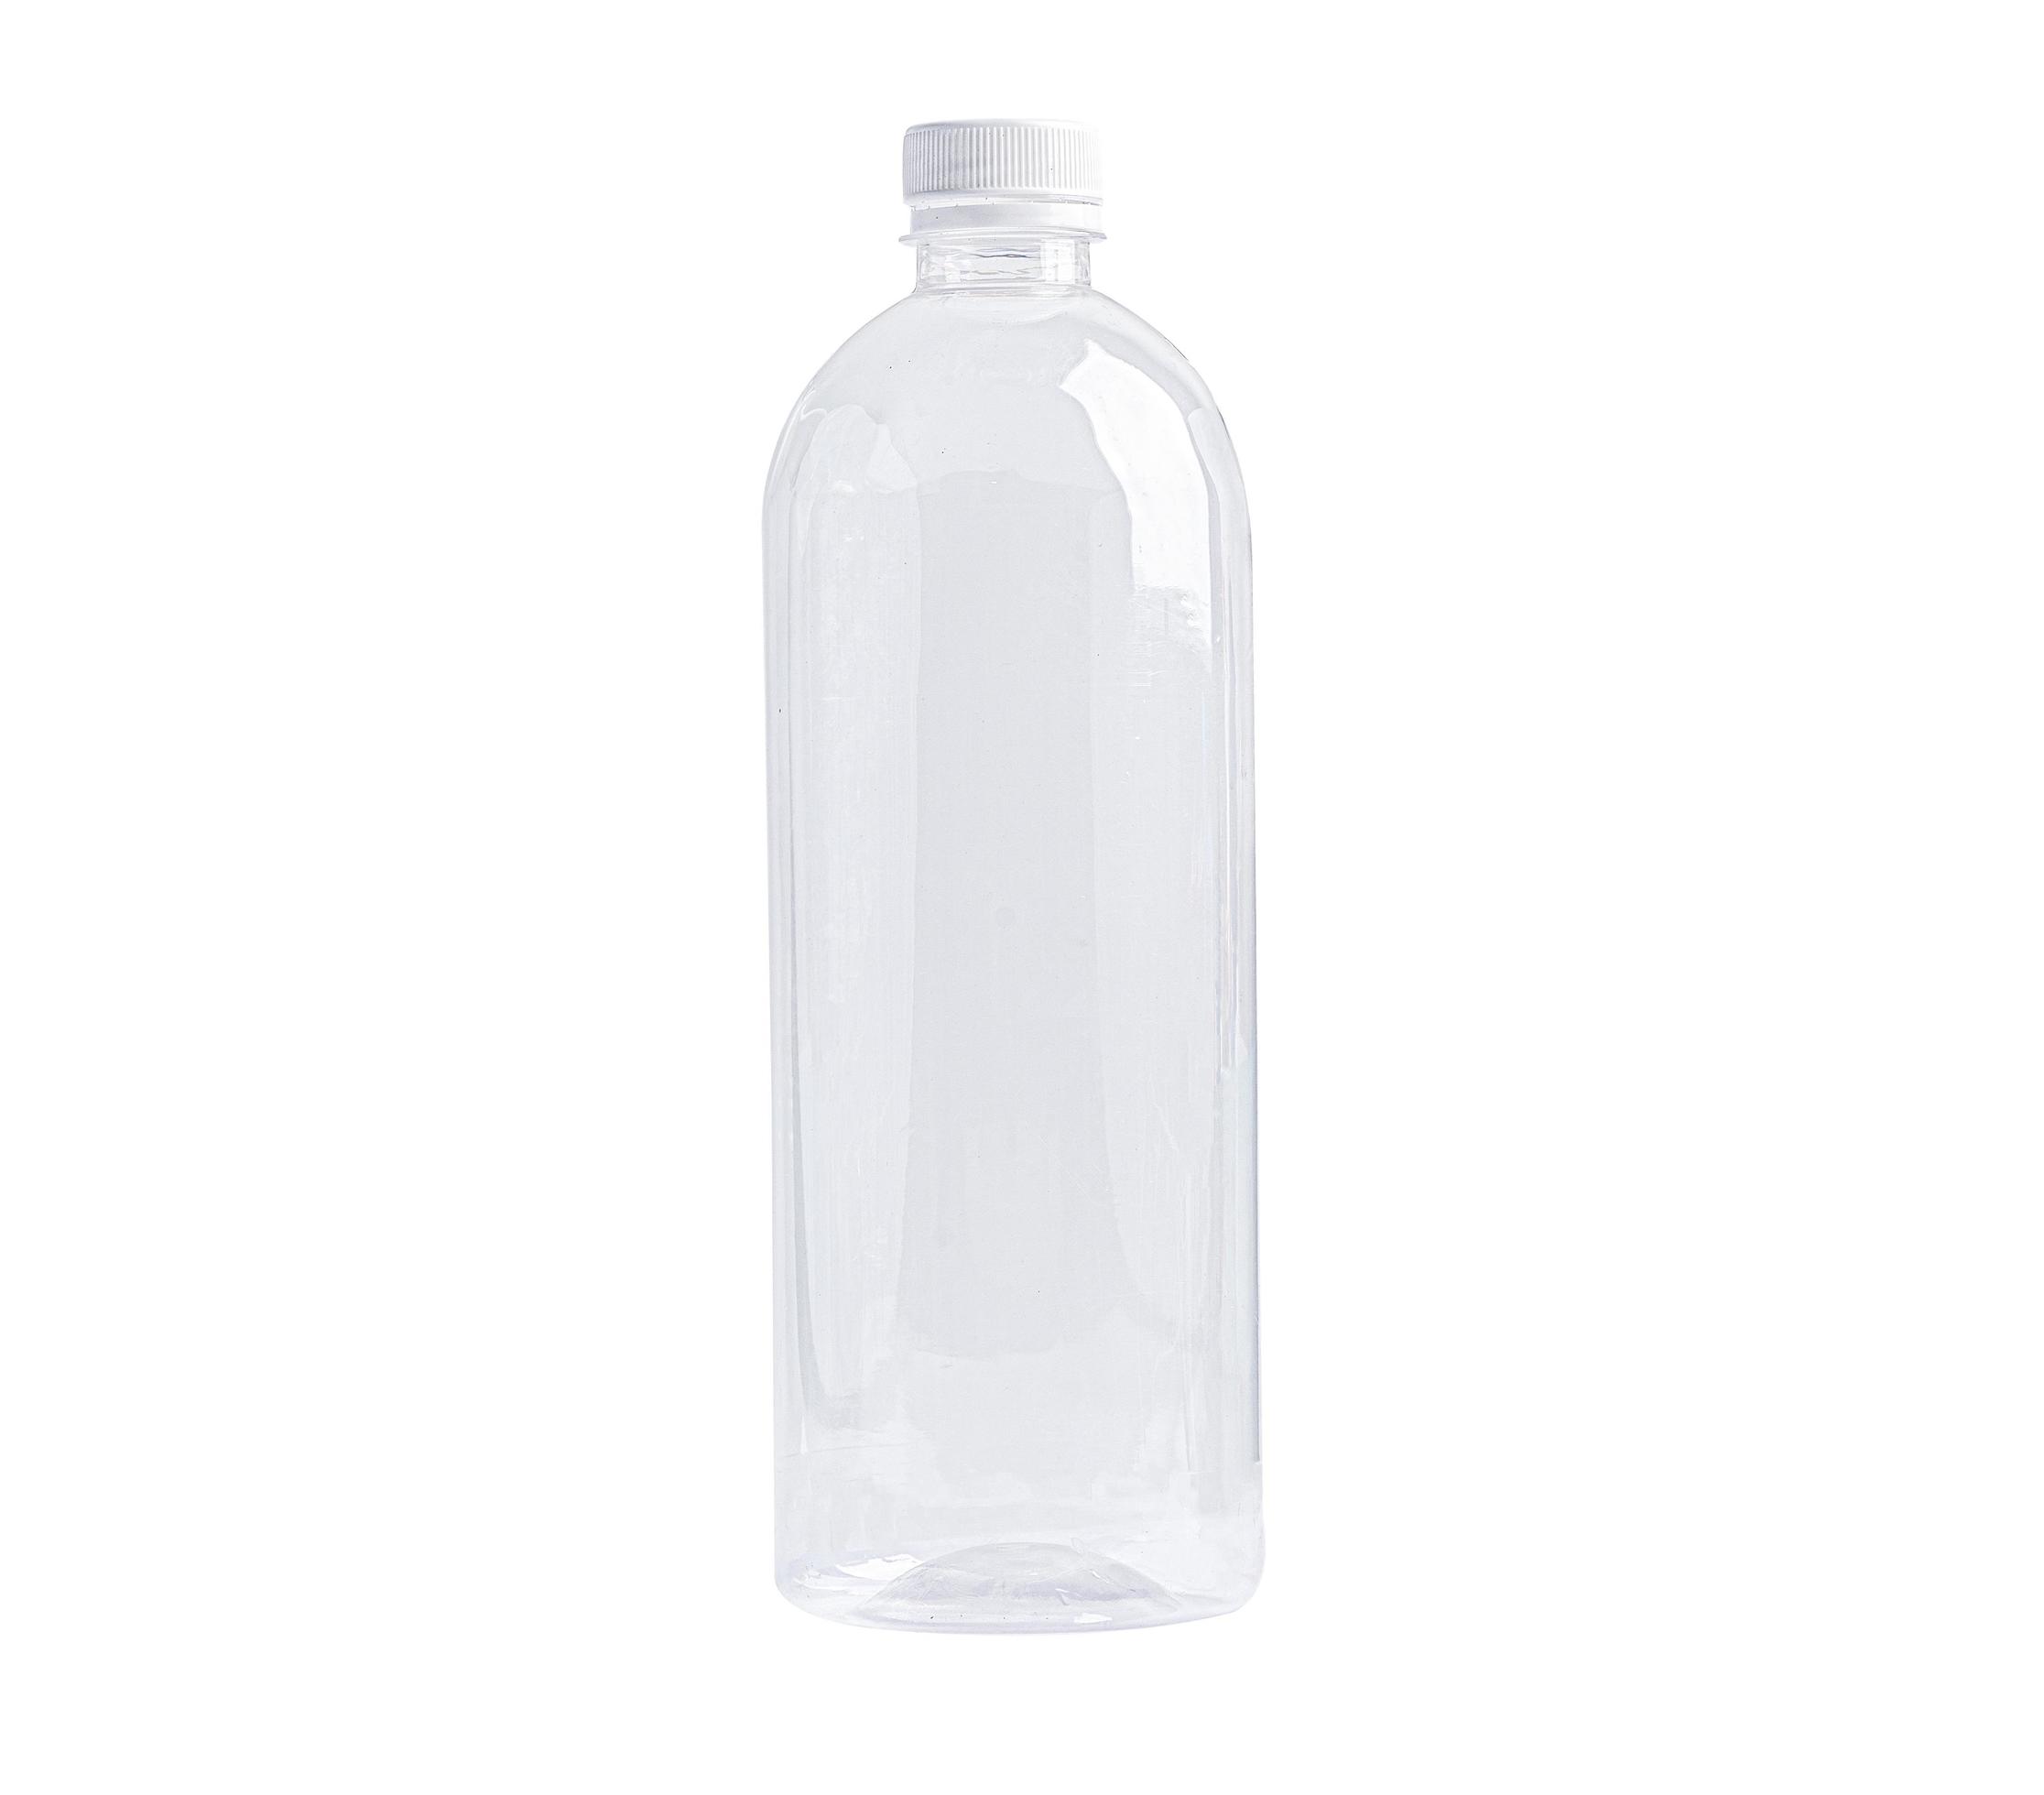 https://static.vecteezy.com/system/resources/previews/002/760/581/large_2x/plastic-water-bottle-isolated-on-white-background-with-clipping-path-free-photo.jpg